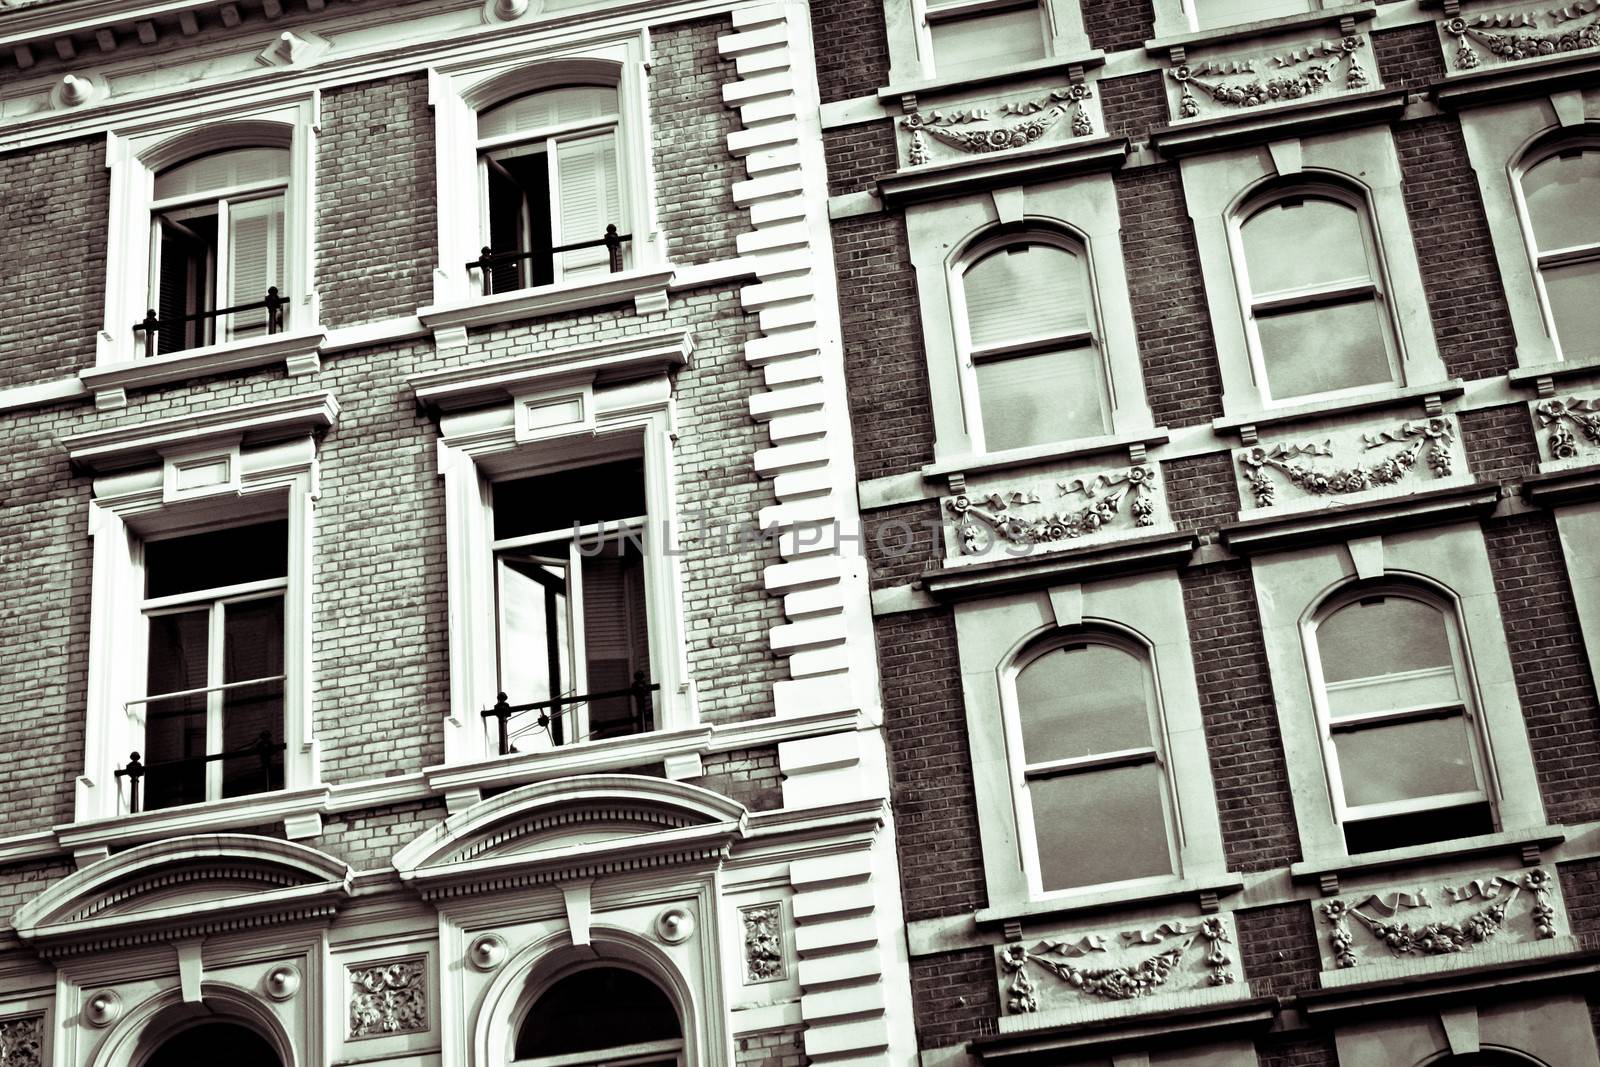 Black and white image of details of architecture in London